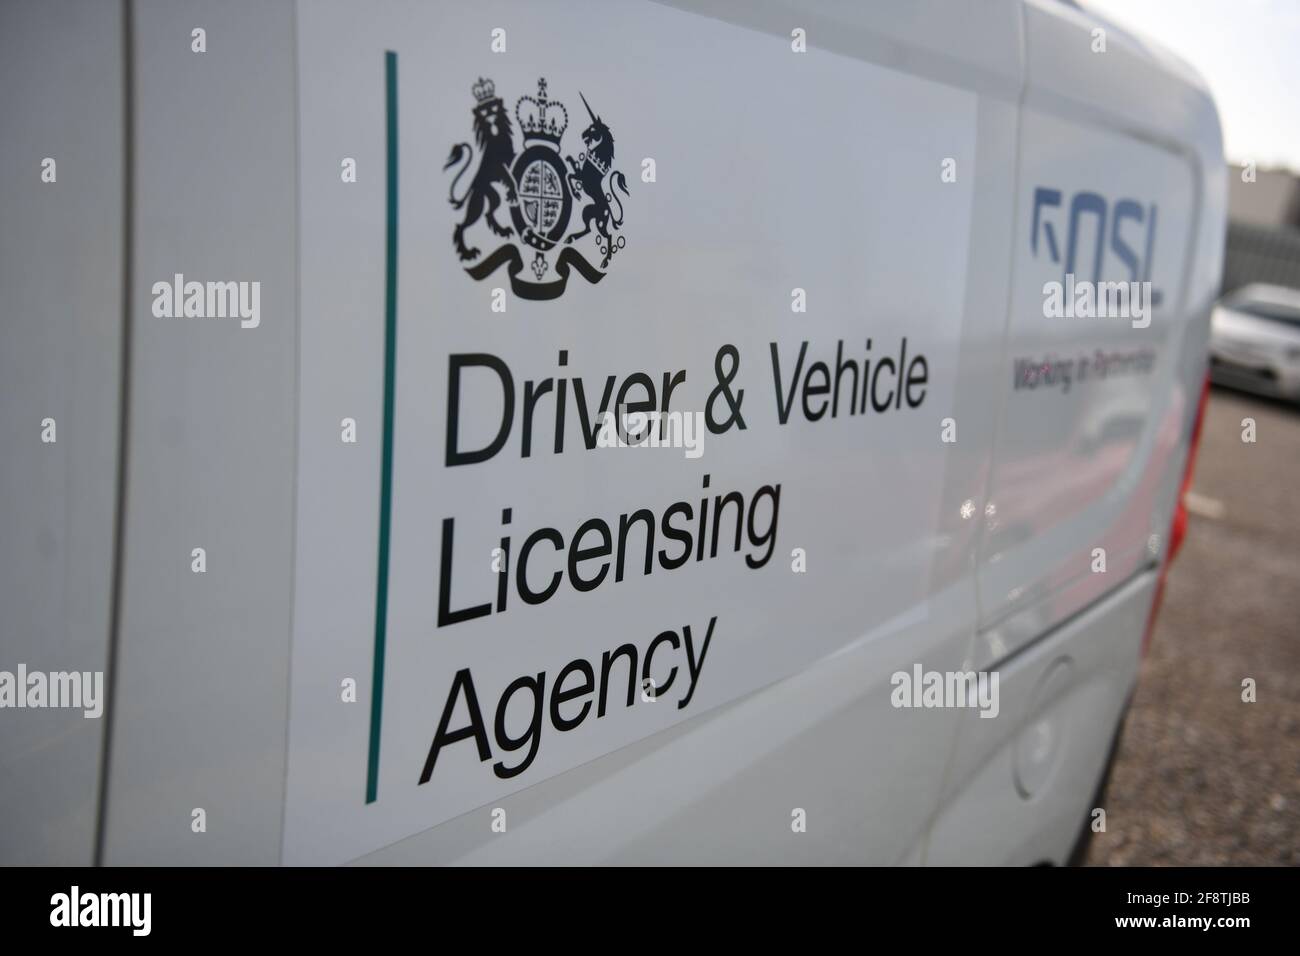 Port Talbot, 13th February 2020 The operation in Neath and Port Talbot to find and clamp untaxed vehicles on the road.  The Driver & Vehicle Licensing Agency sign on the side of a van. Stock Photo